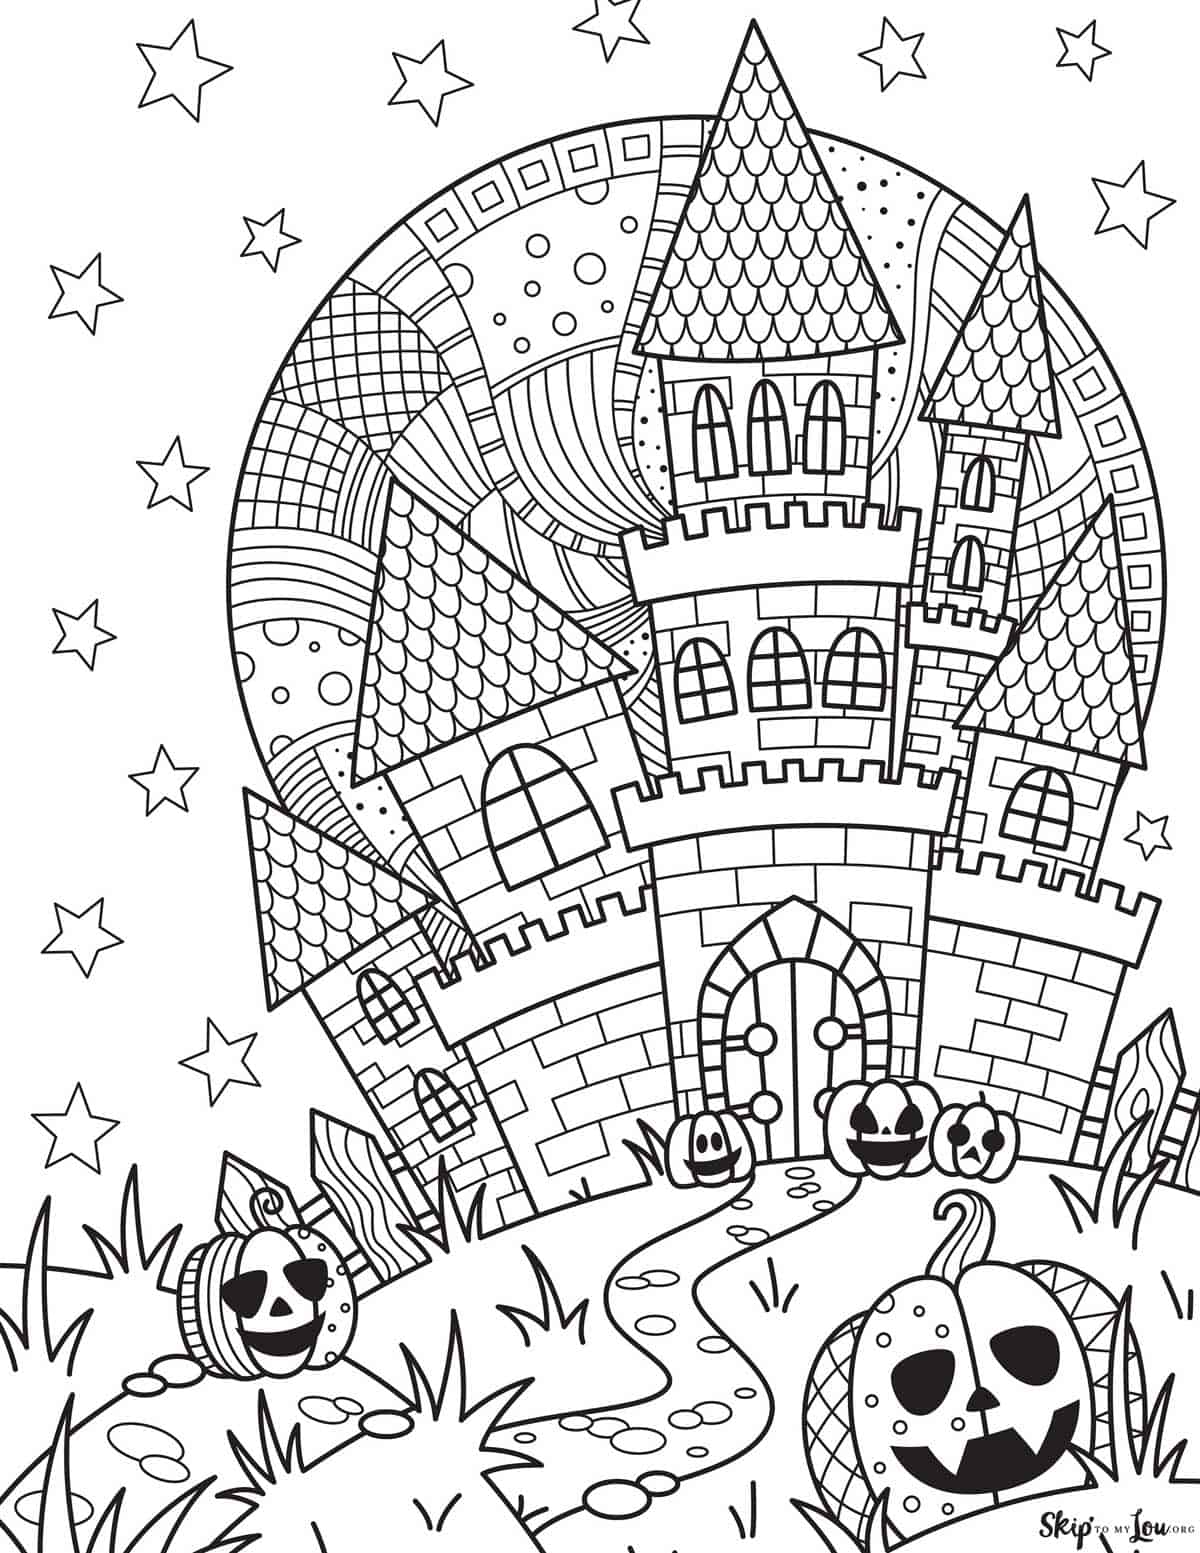 Download Cute Halloween Coloring Pages to print and color! | Skip ...